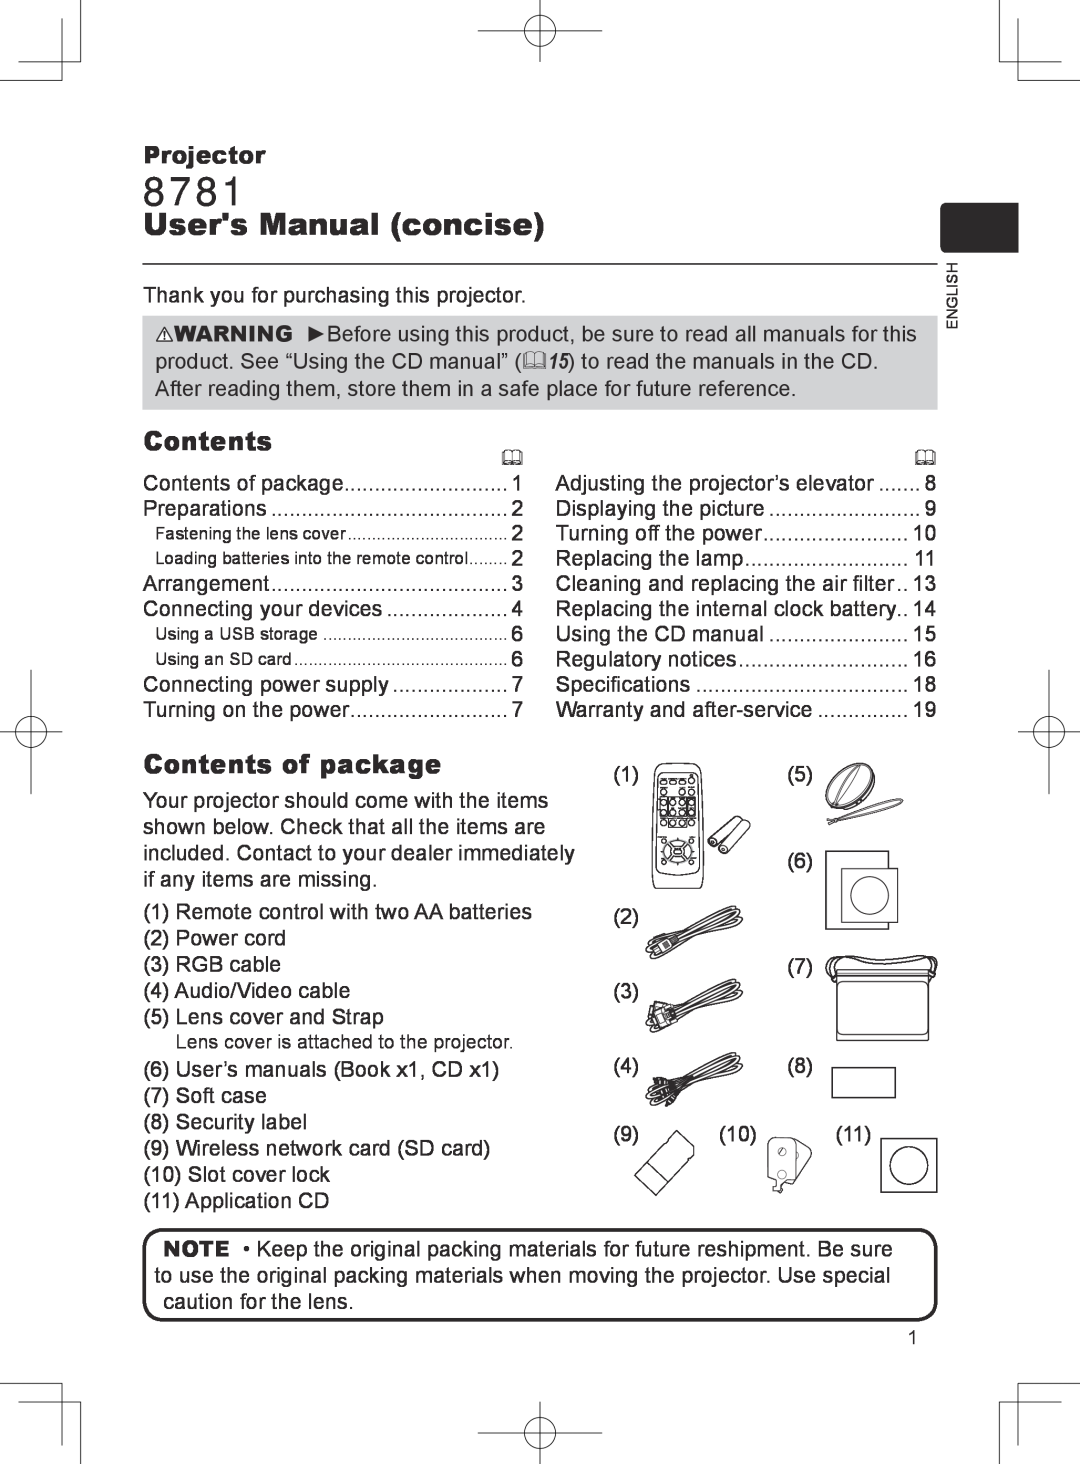 Dukane 8781 user manual Contents of package, Projector, Users Manual concise 